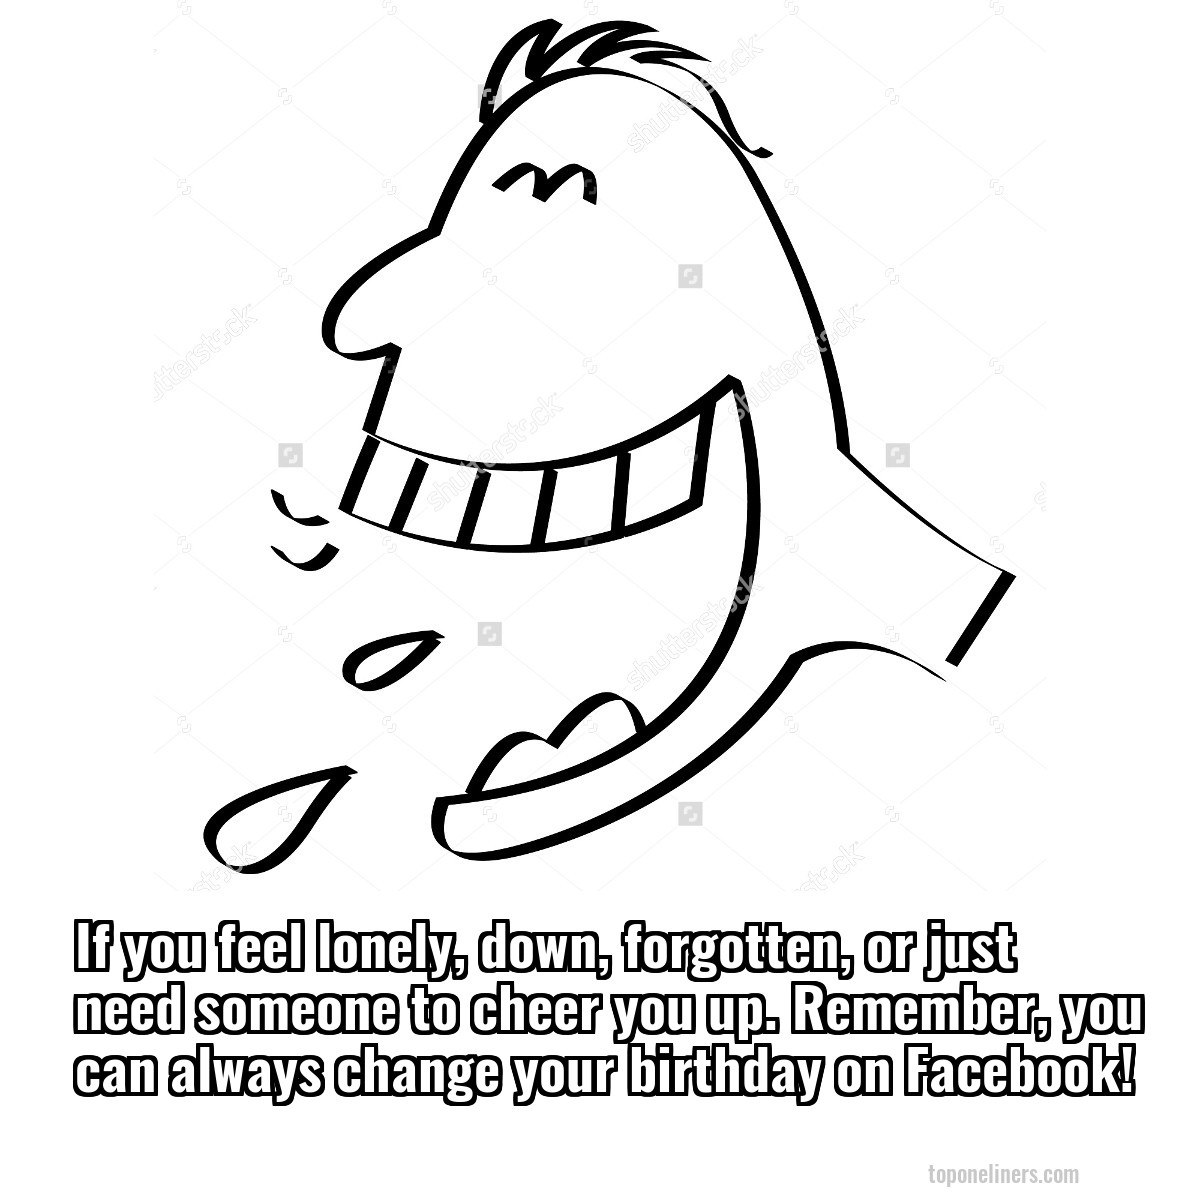 If you feel lonely, down, forgotten, or just need someone to cheer you up. Remember, you can always change your birthday on Facebook!